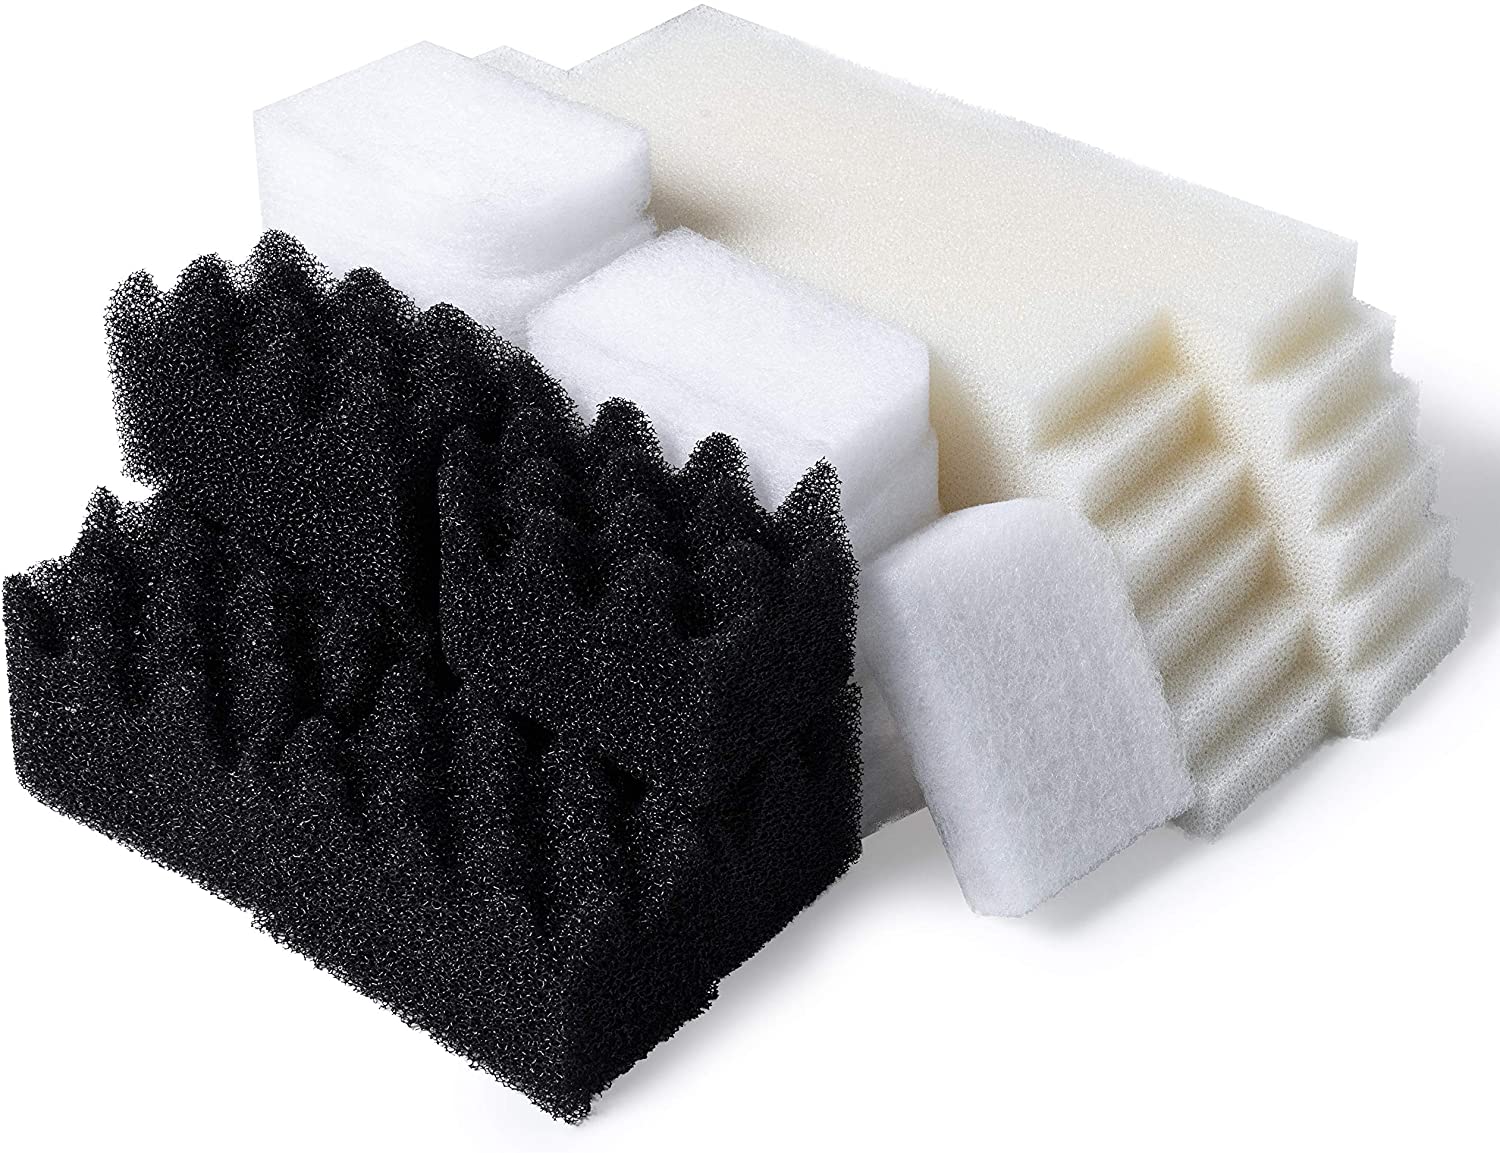 LTWHOME Value Pack of Foam Filters and Polishing Pads Set Fit for Fluval 404, 405,406 (Pack of 30)